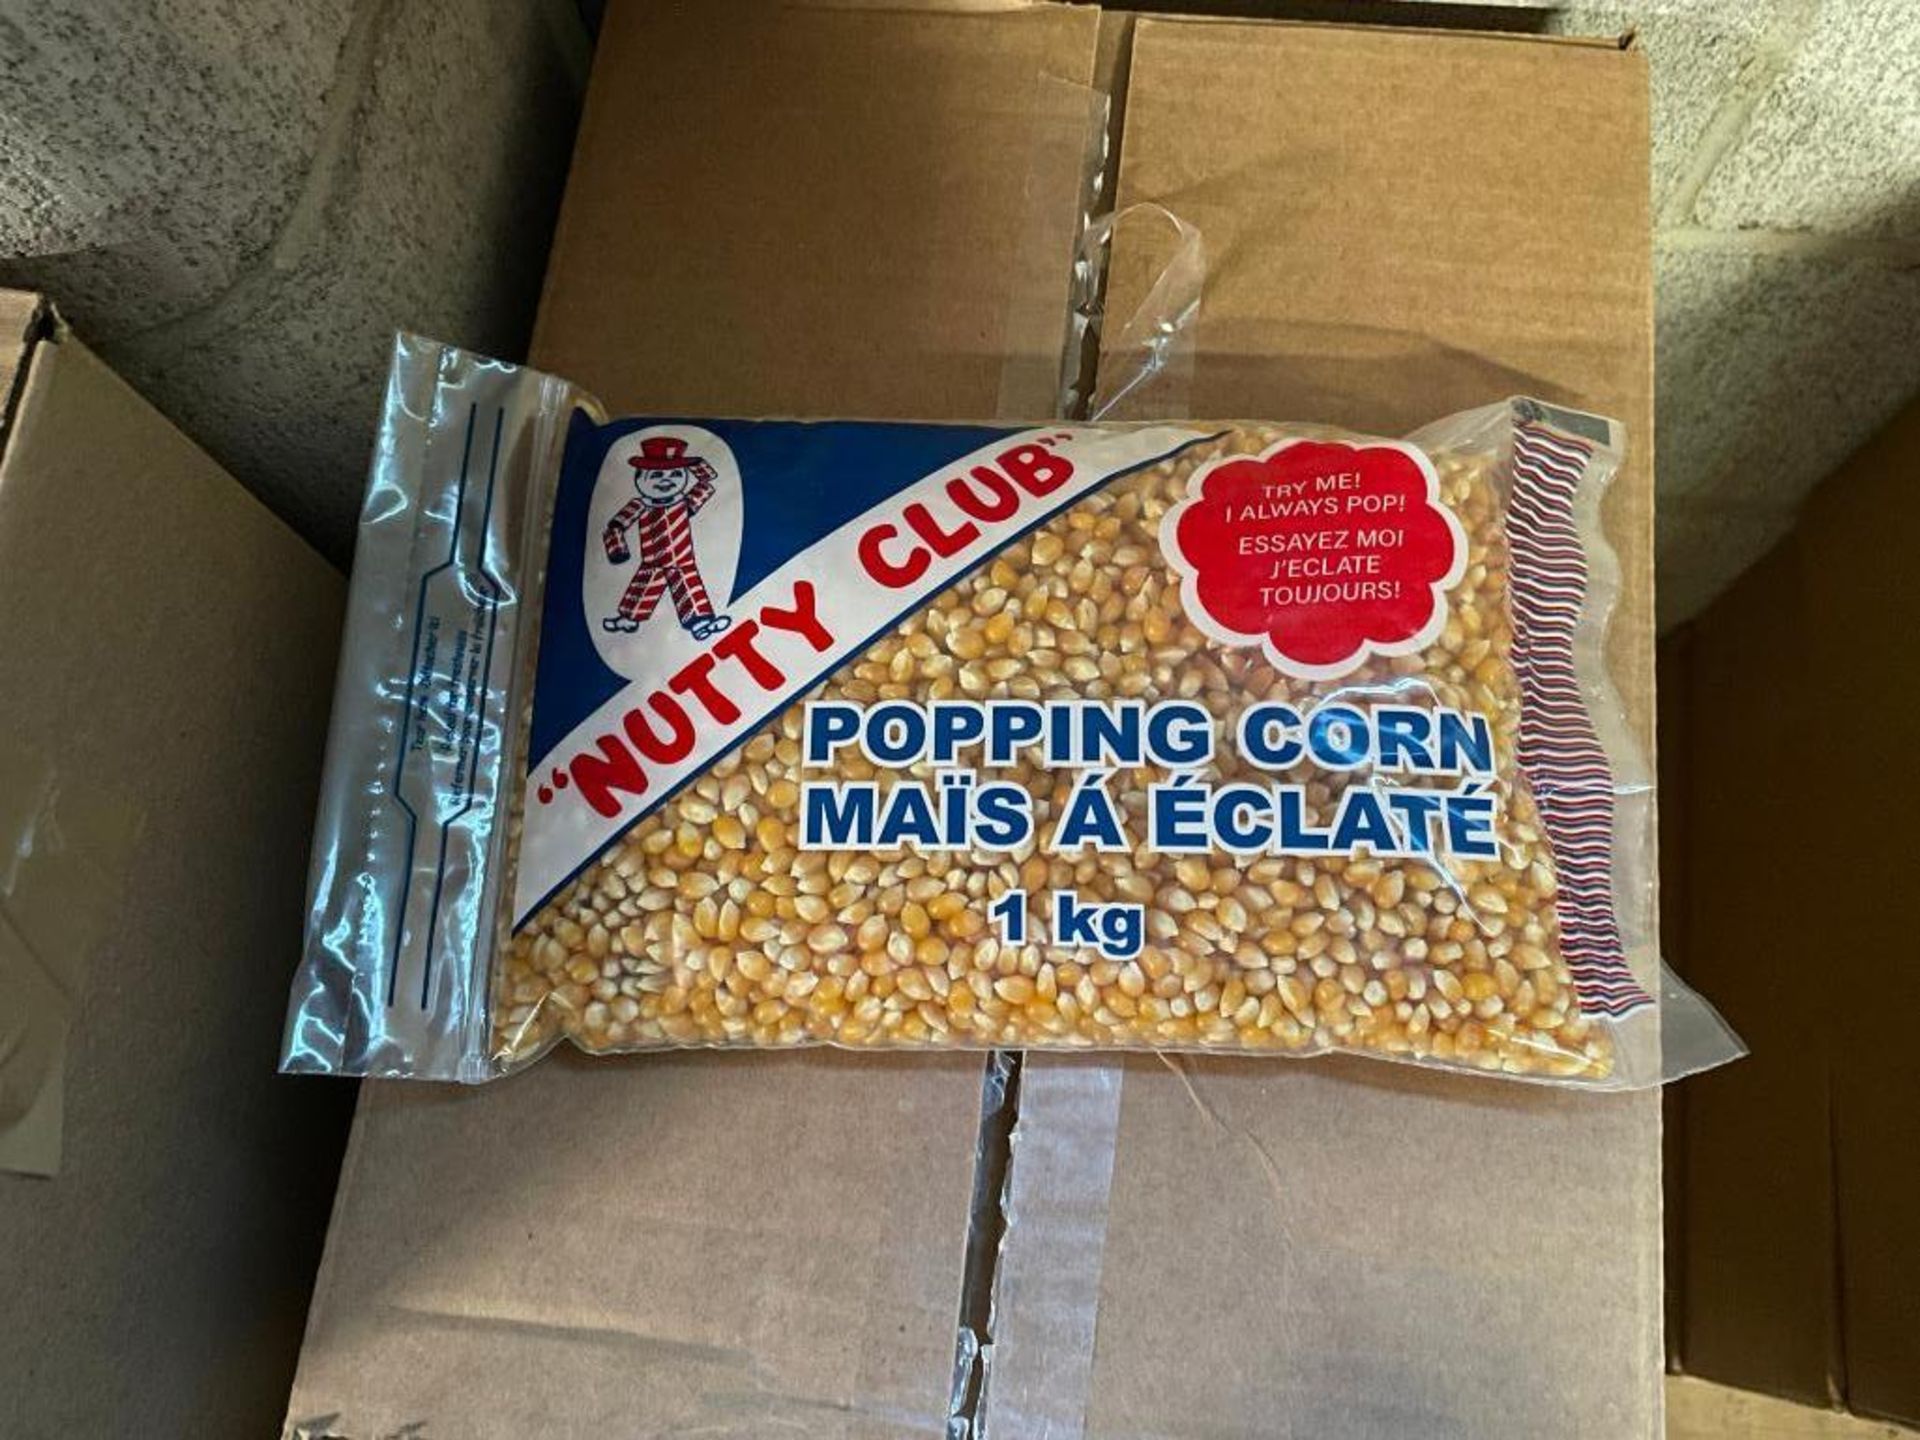 (4) BOXES OF NUTTY CLUB POPPING CORN, 12/1KG BAGS PER BOX - Image 2 of 2